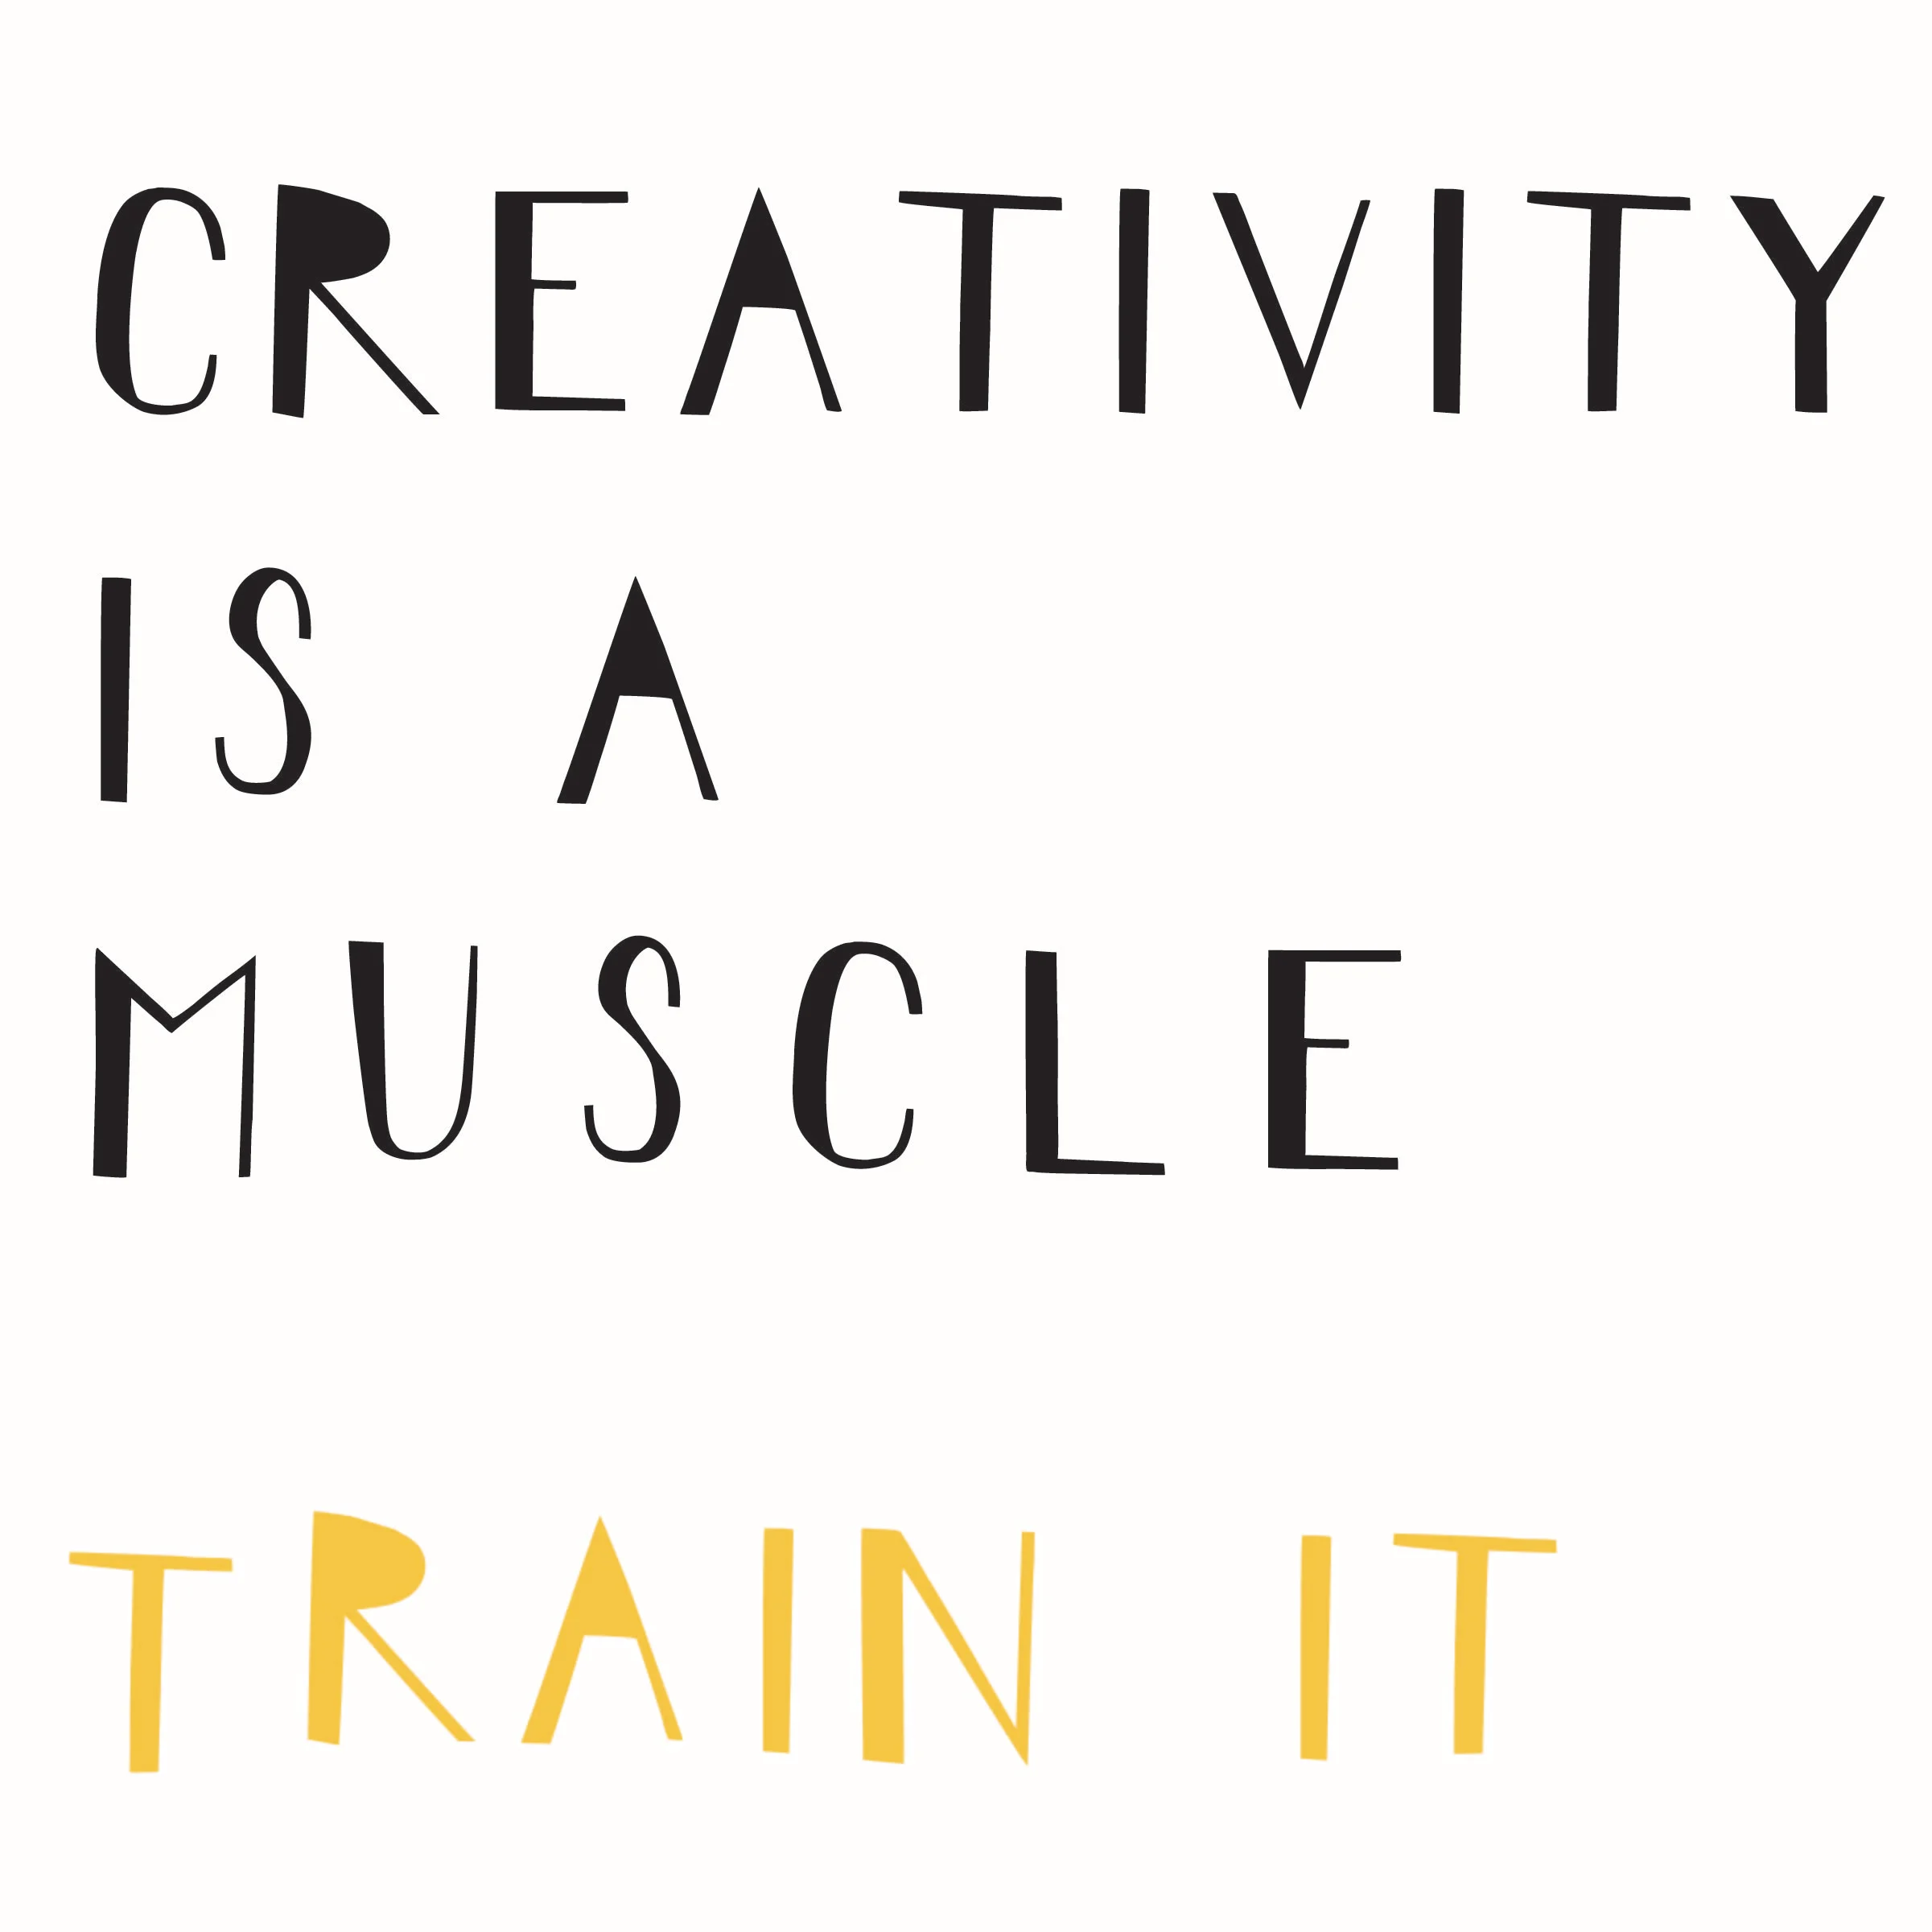 Creativity Quotes_Creativity is a Muscle Train It_Yellow.jpg